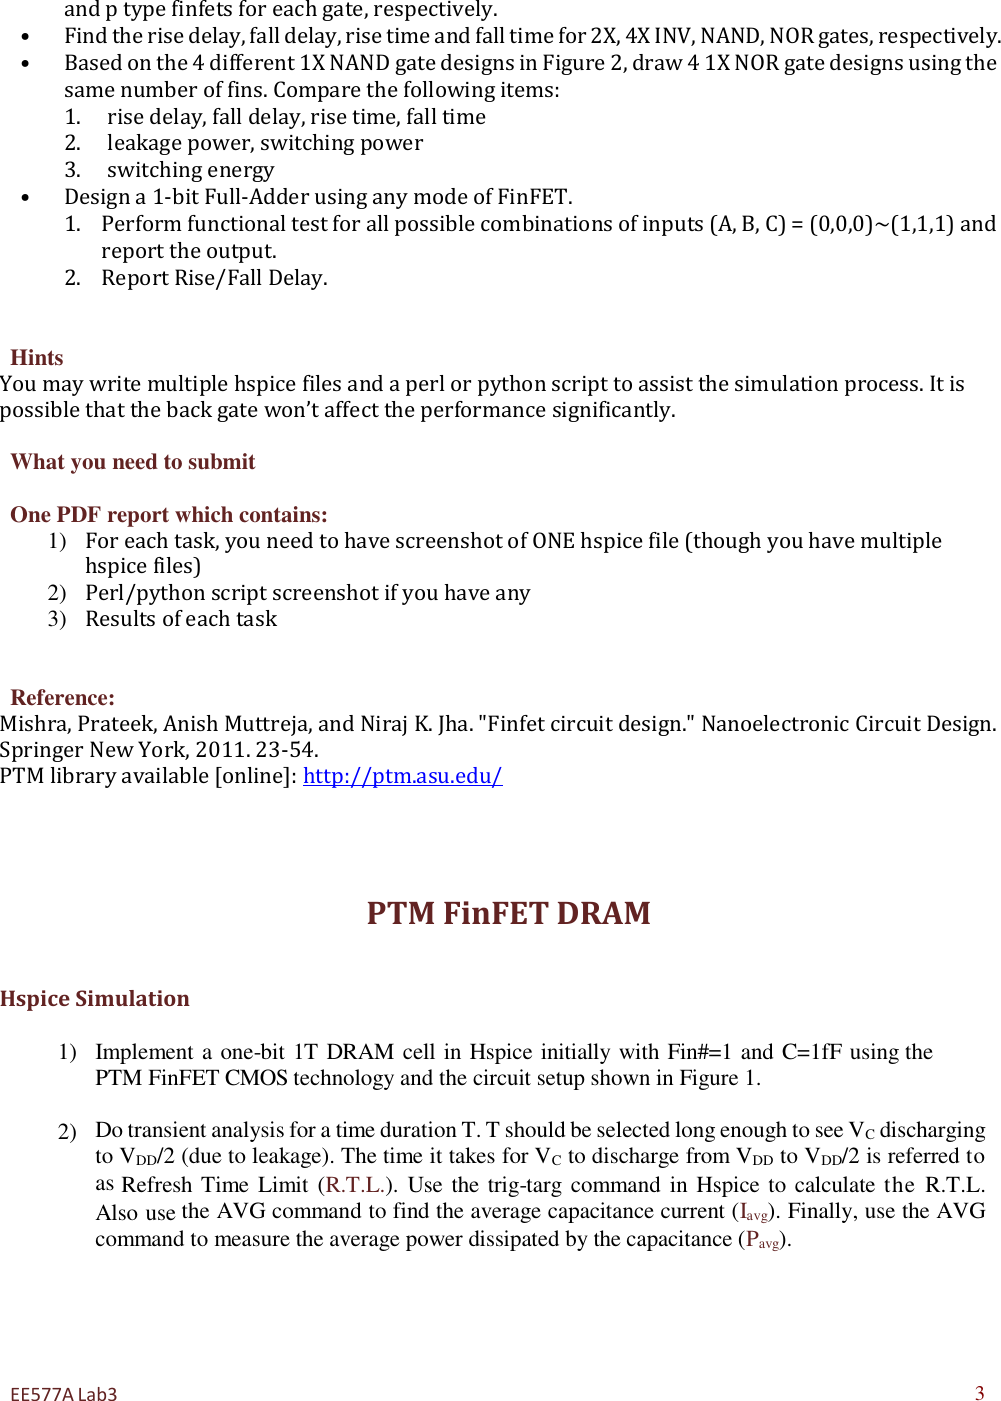 Page 3 of 5 - Guide